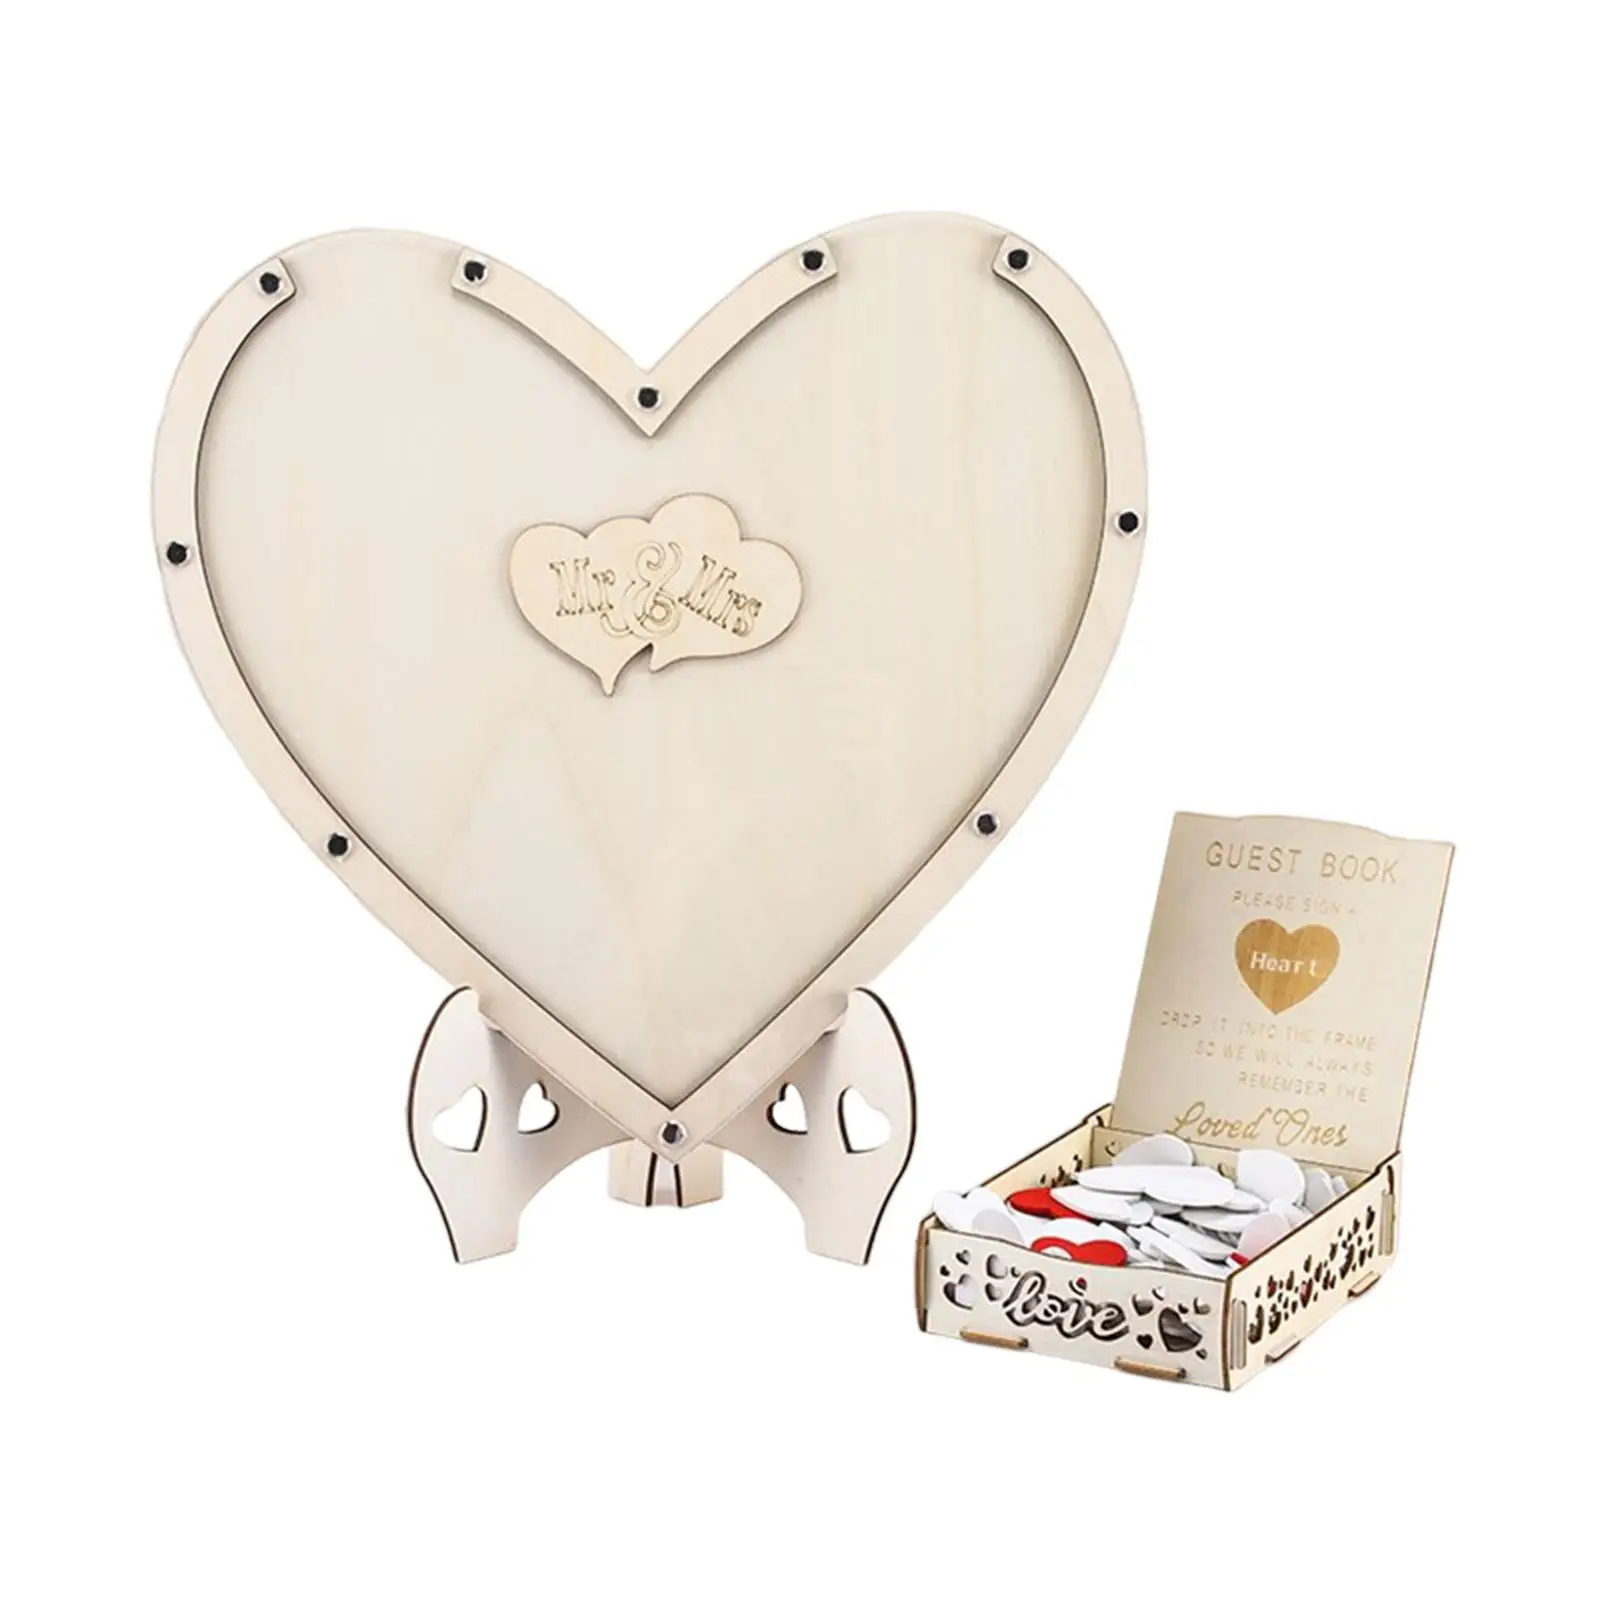 Wedding Guest Book Heart Shaped Wooden Frame Drop box 80 Chips decor for Anniversary Special Events